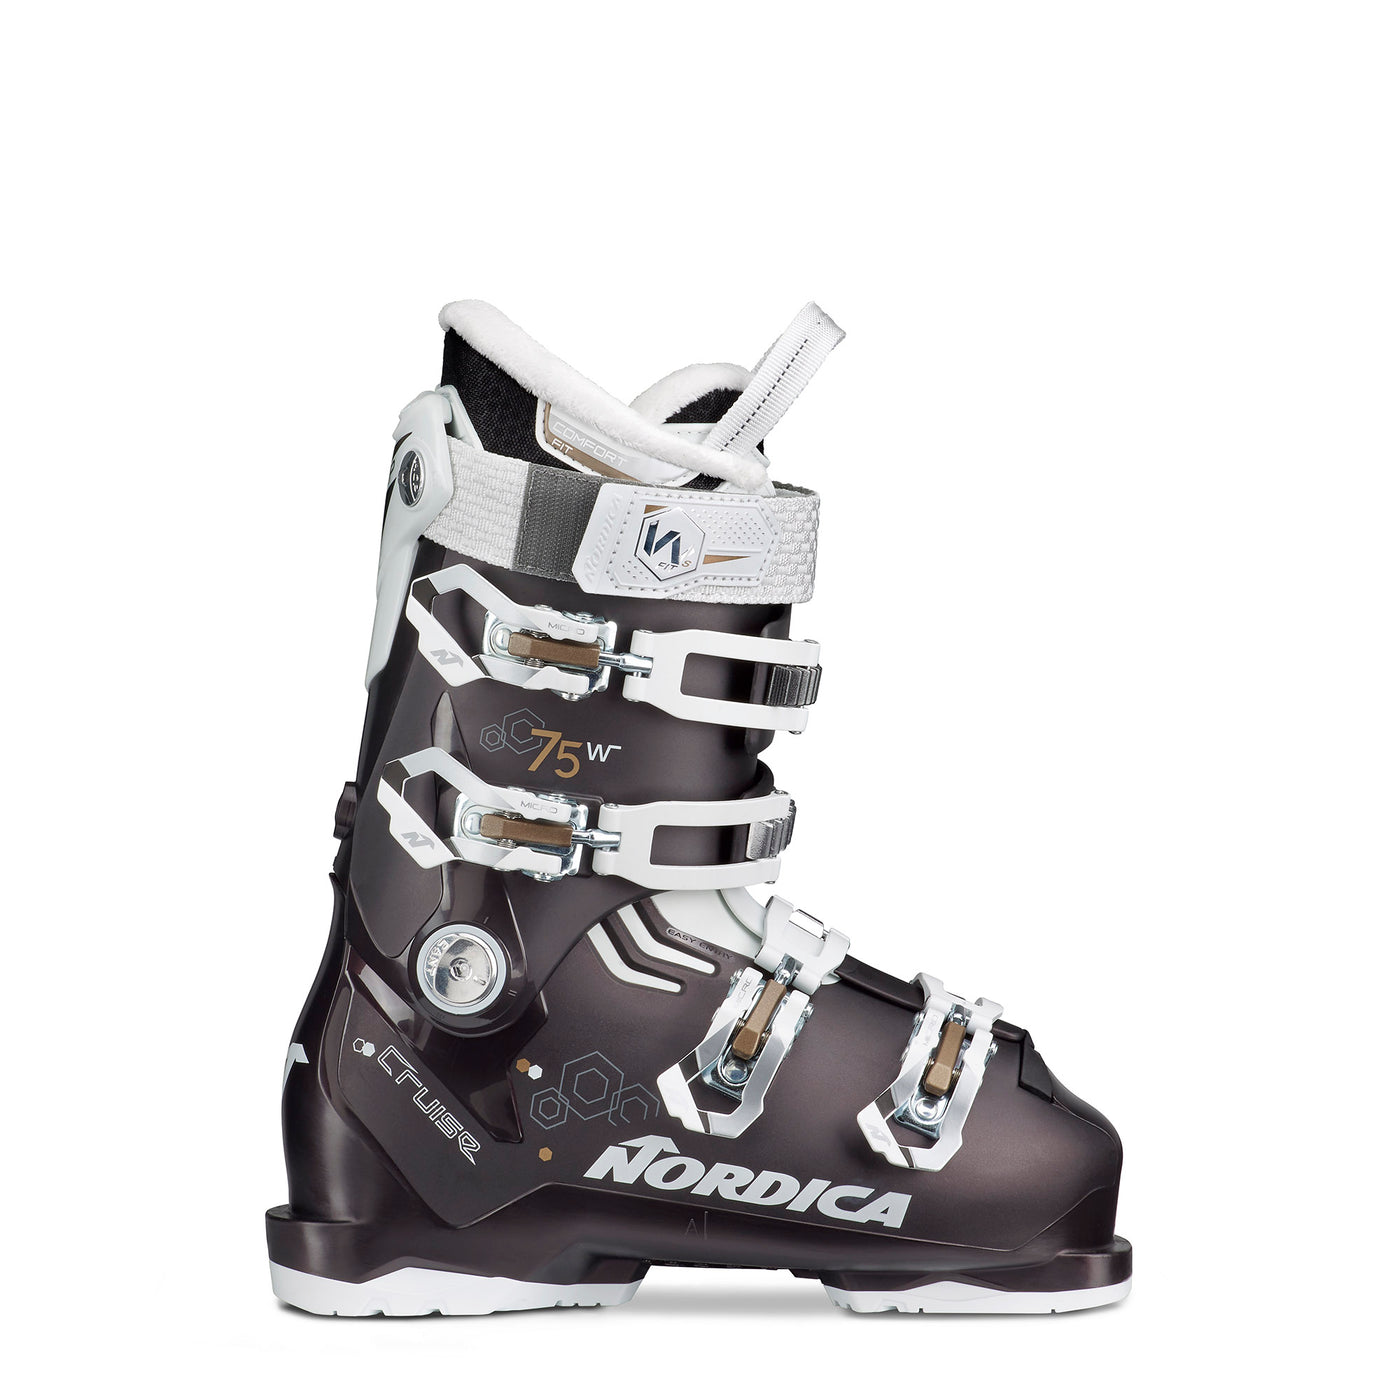 NORDICA CRUISE 75W - ProSkiGuy your Hometown Ski Shop on the web